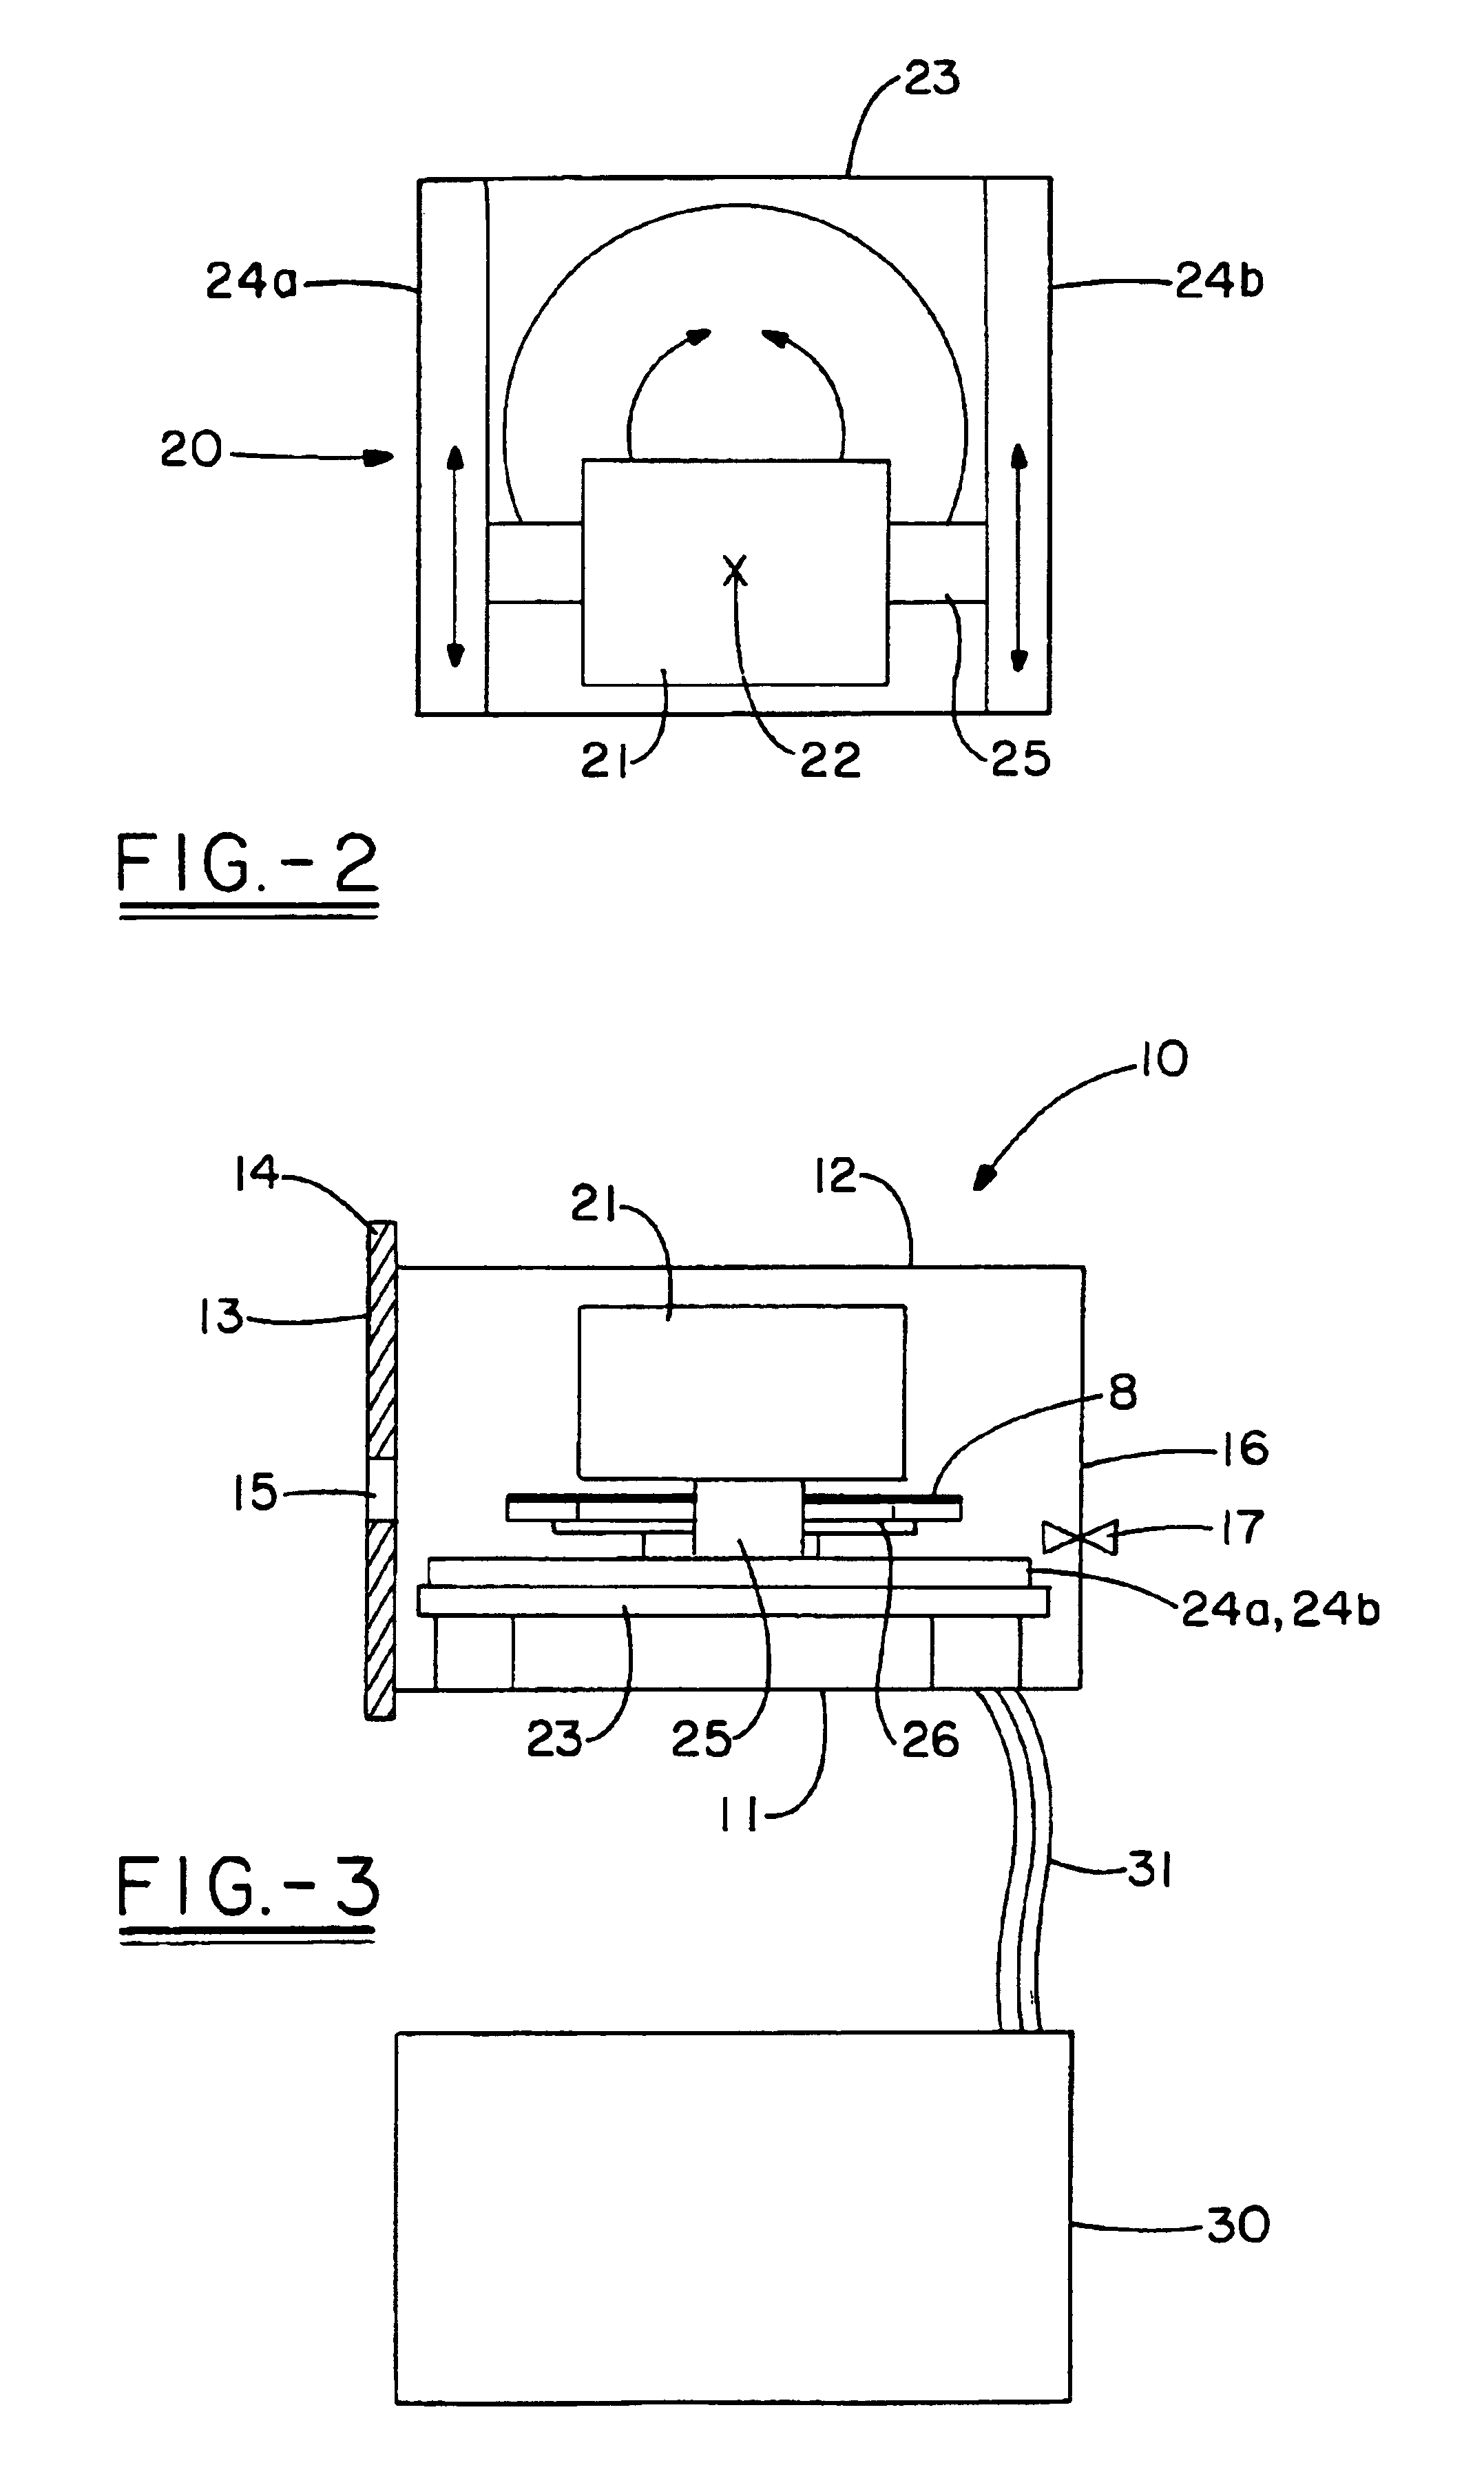 Measurement box with module for measuring wafer characteristics